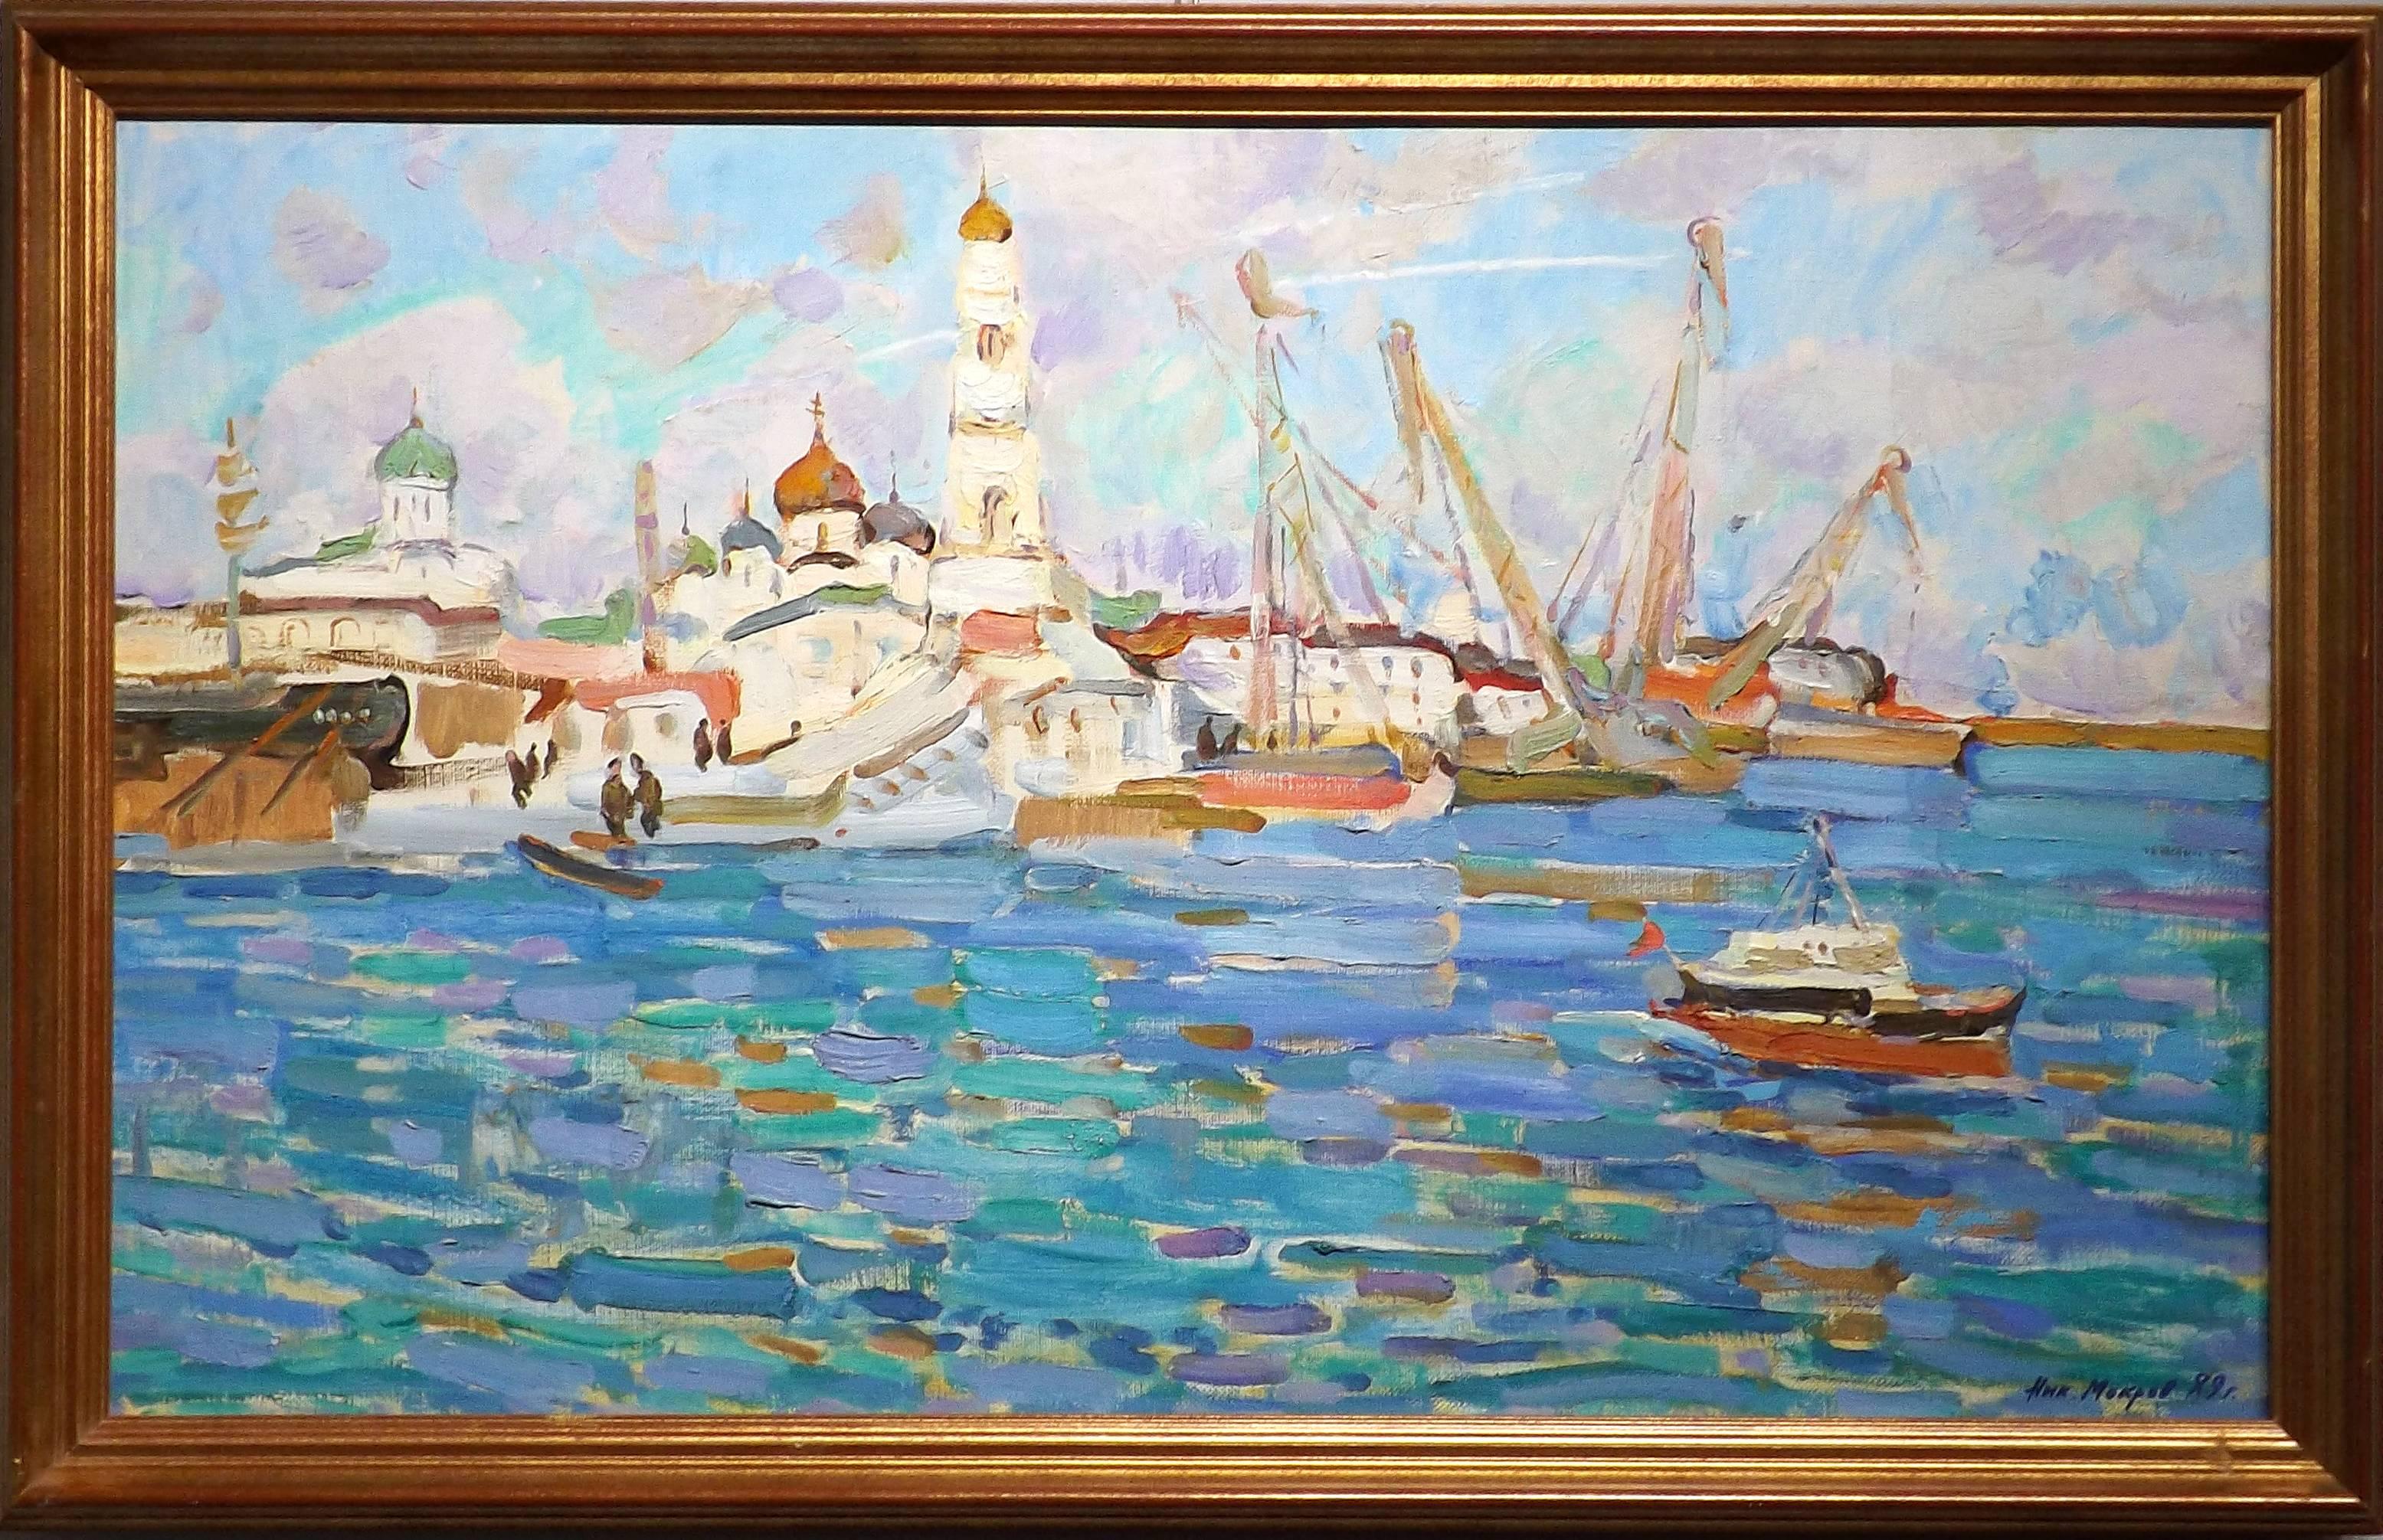 A wonderful Soviet Era painting of a busy port in the city of Kineshma along the Volga River, Russia. Wide brushstrokes of blue rippling water in the foreground with boats being offloaded. In the distance church towers rise into the sky.

Born in